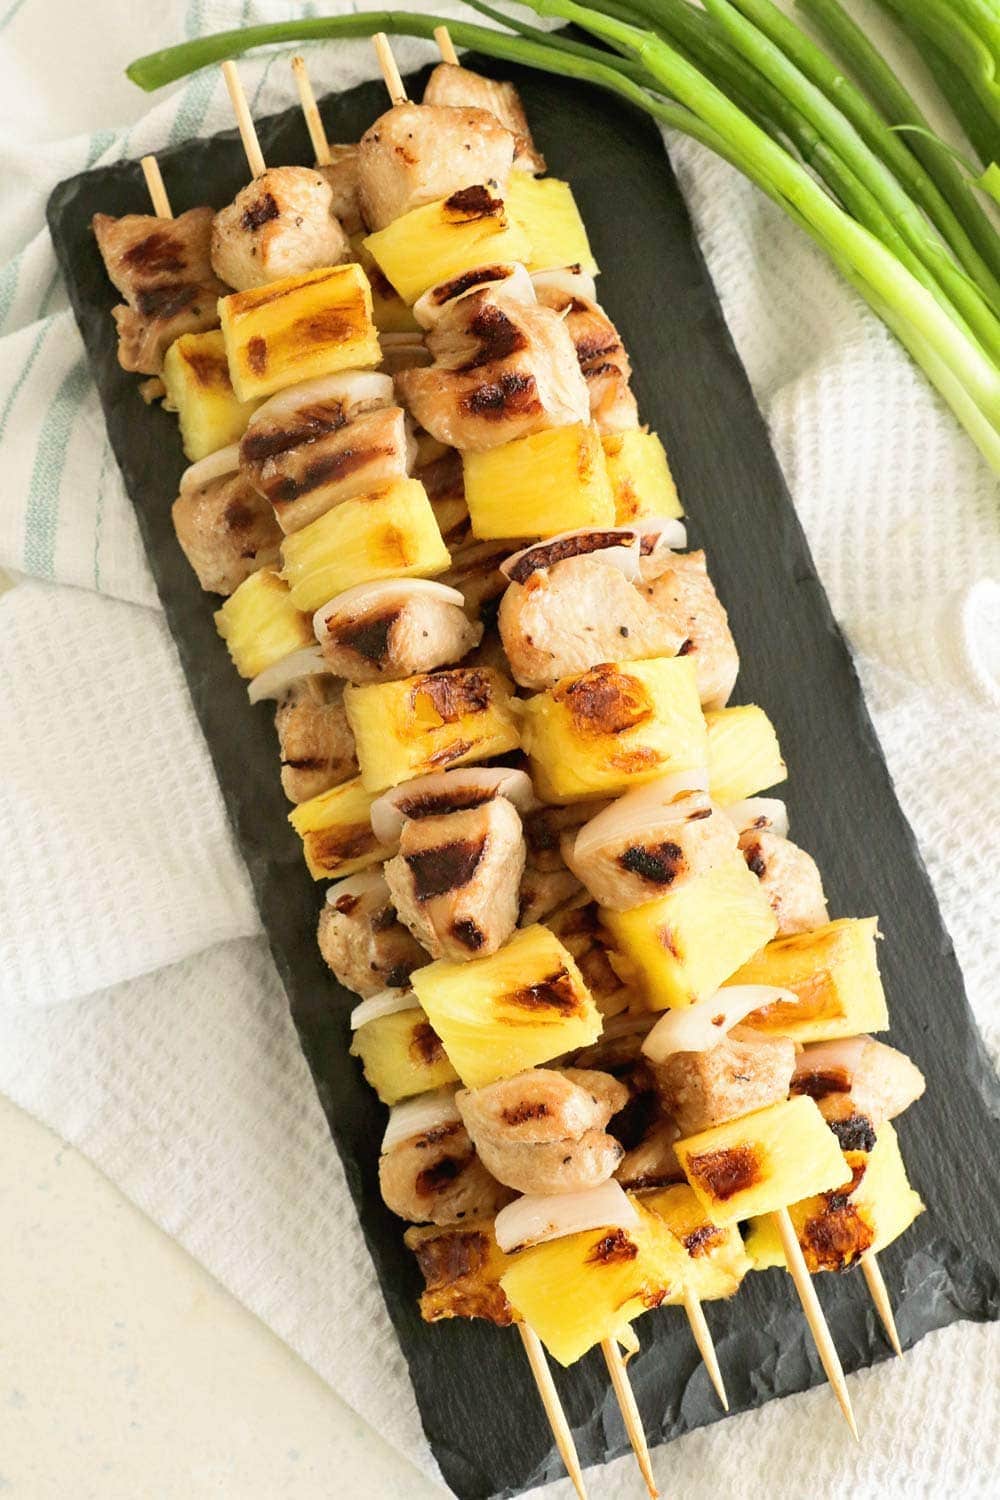 How to make chicken kebabs